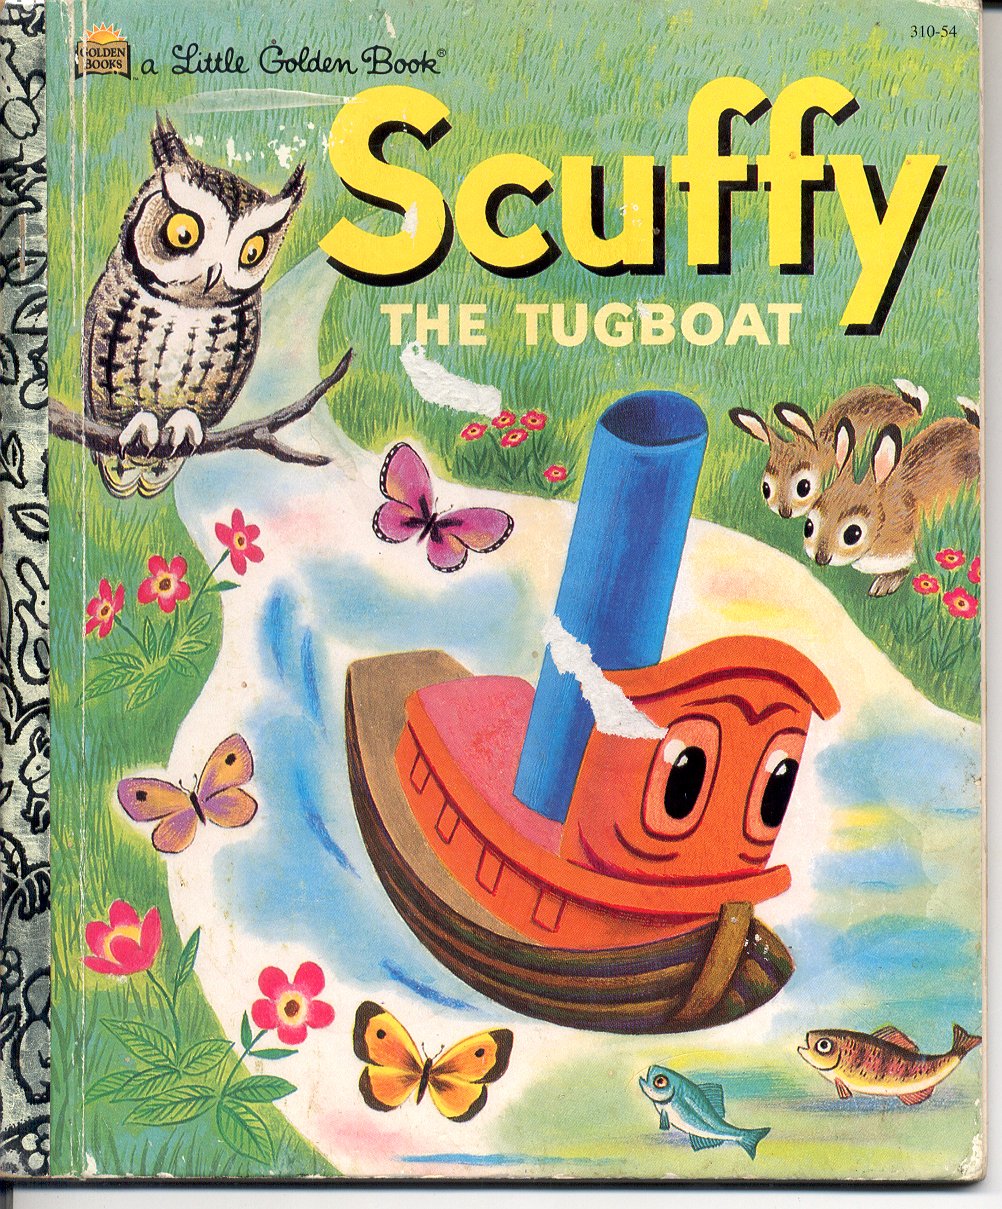 A LITTLE GOLDEN BOOK - CHICK-FIL-A - SCUFFY THE TUGBOAT # 3 HB 1983 GOOD